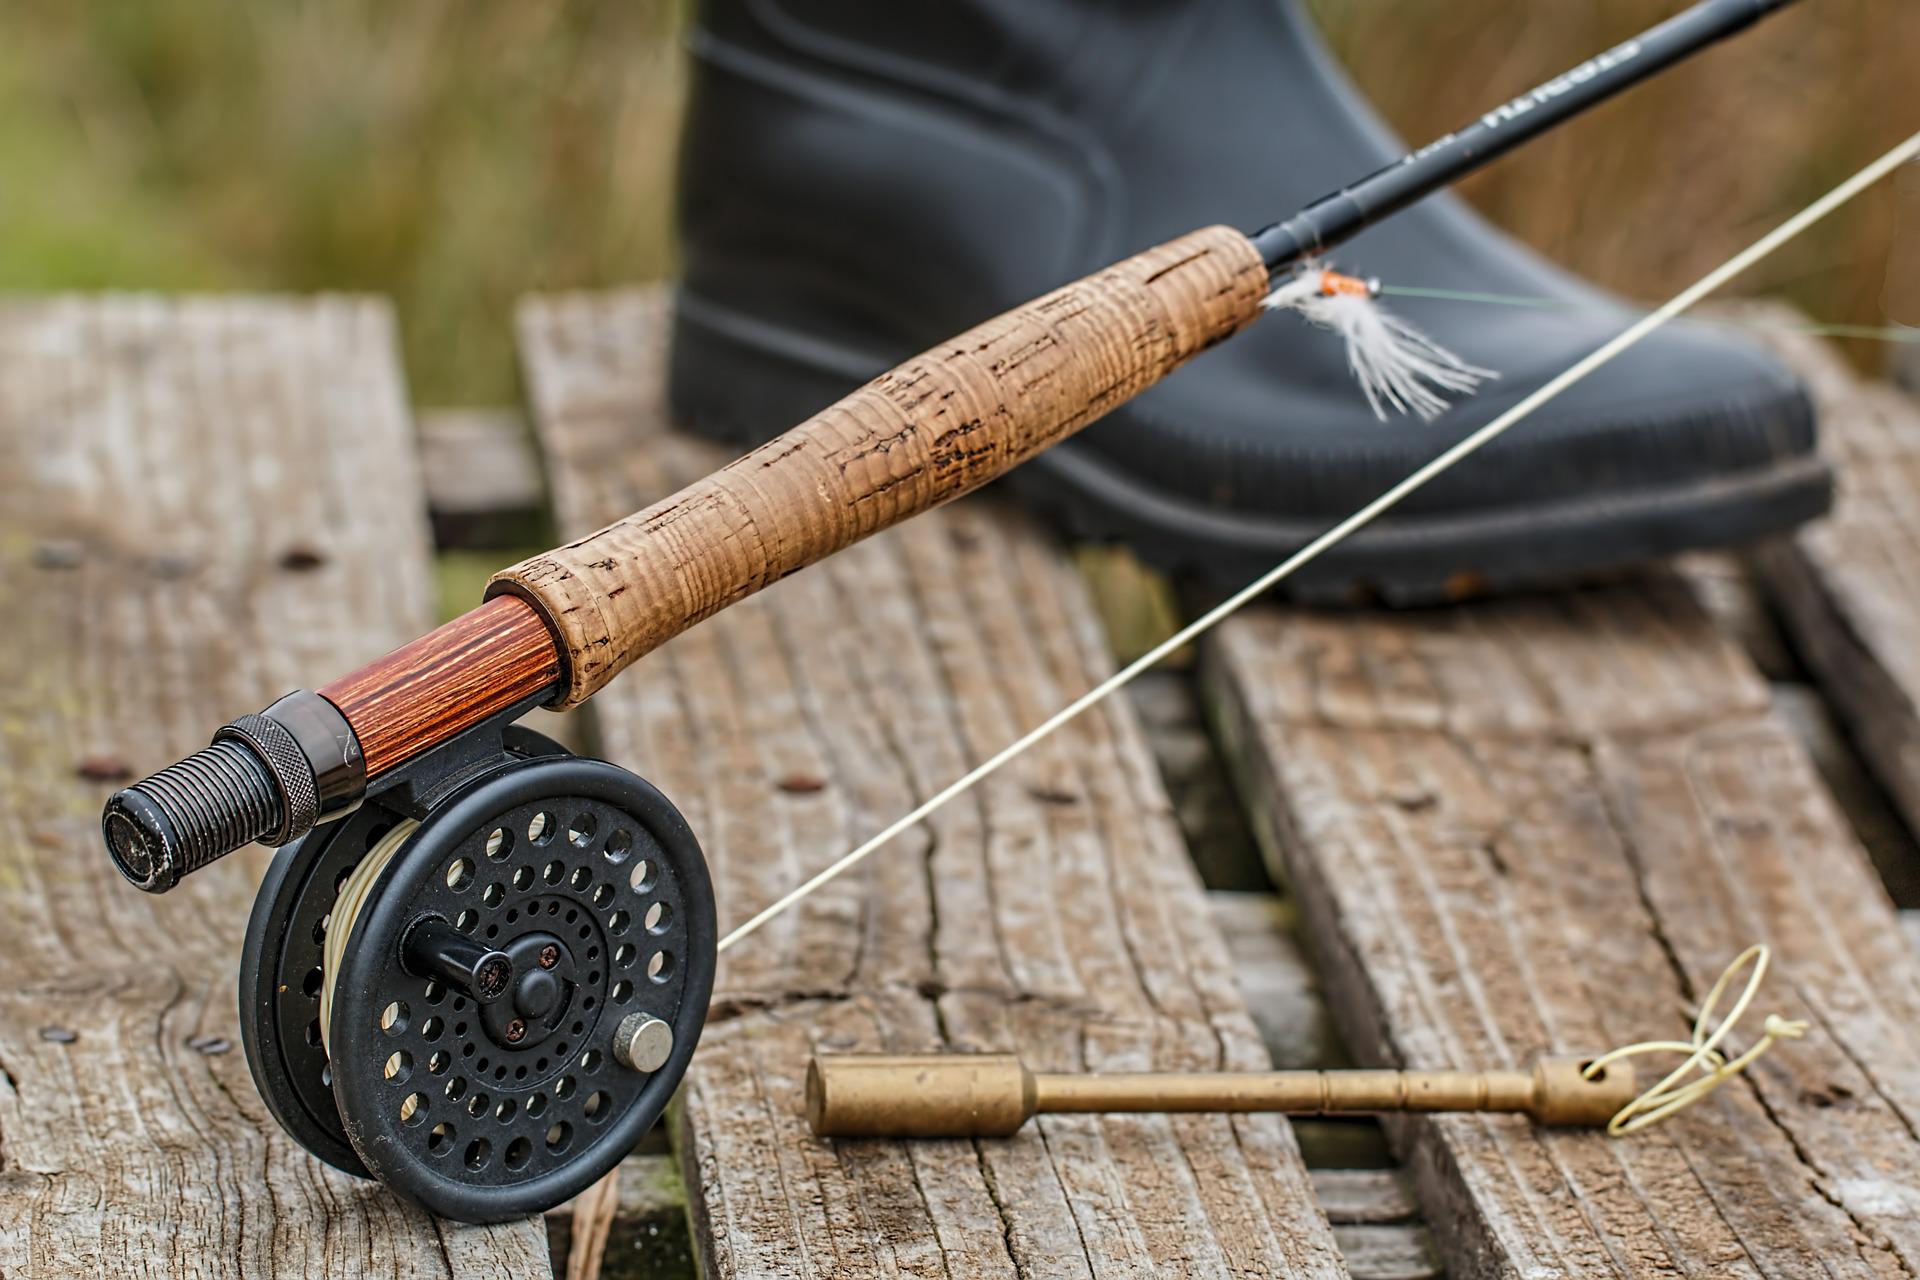 Fly Rod Handles are Generally Made from Cork. Quality Cork is a Strong Indicator of Rod Quality.